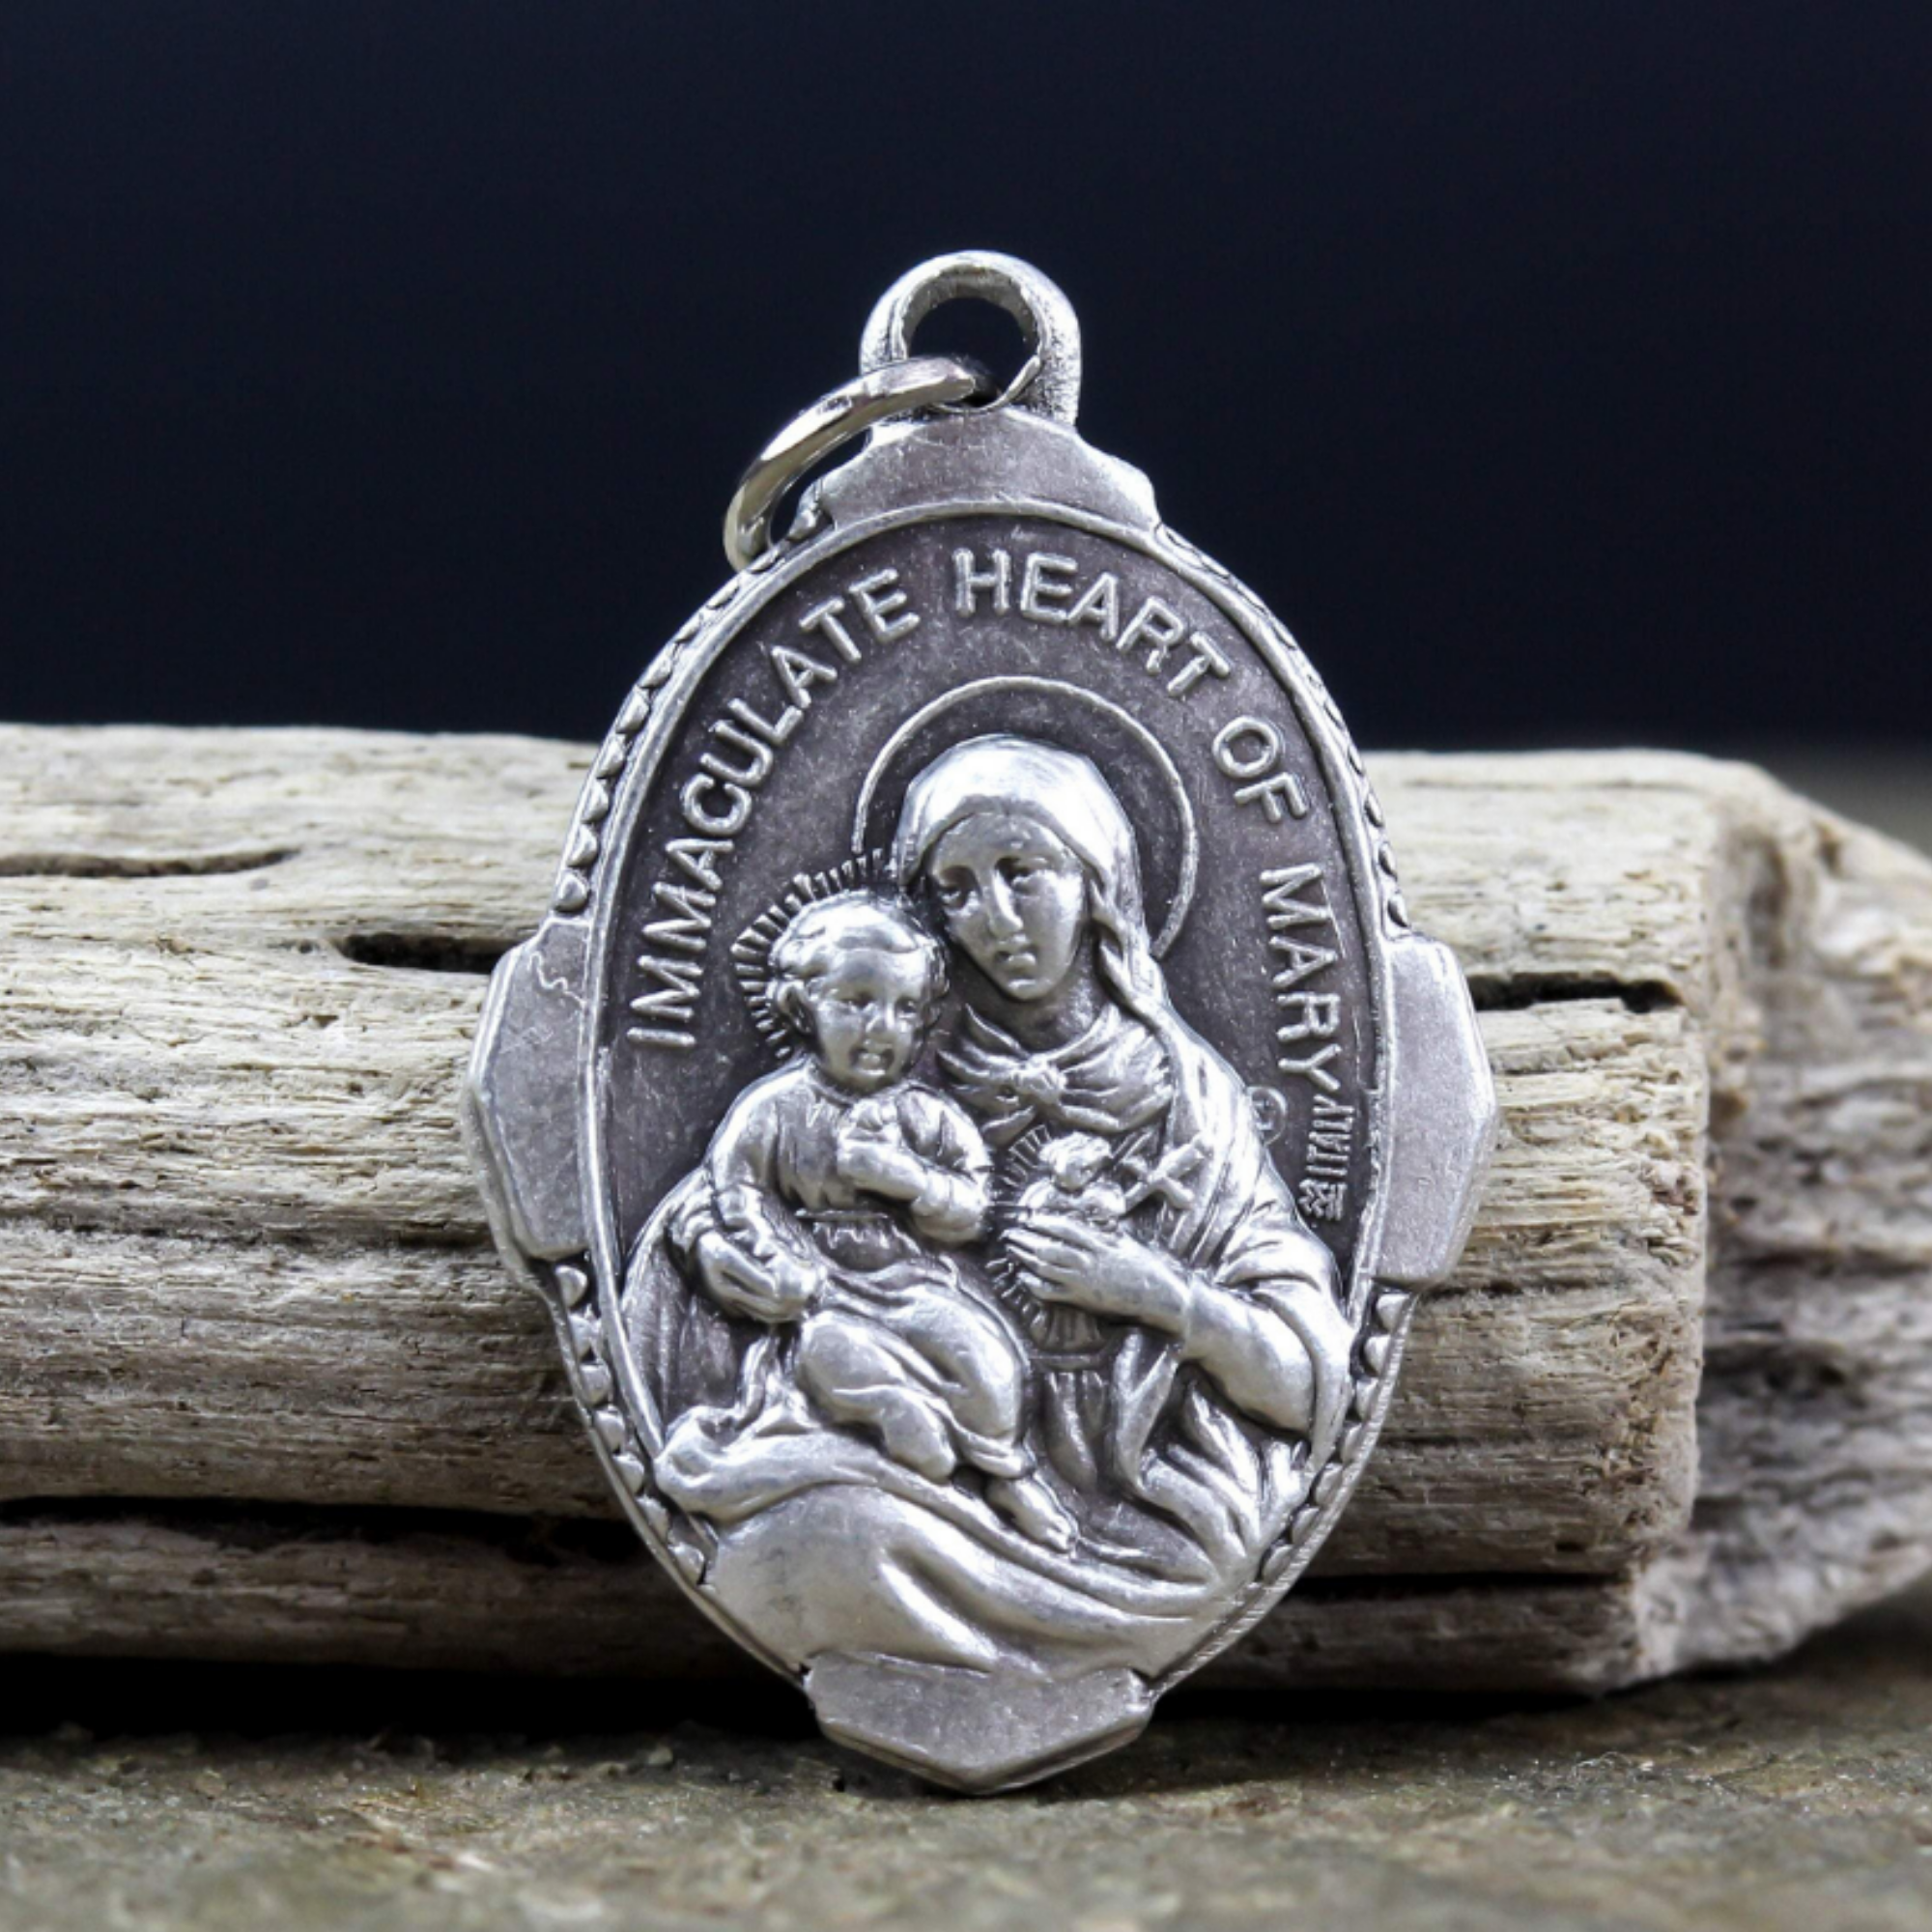 Immaculate Heart of Mary Pray For Us medal